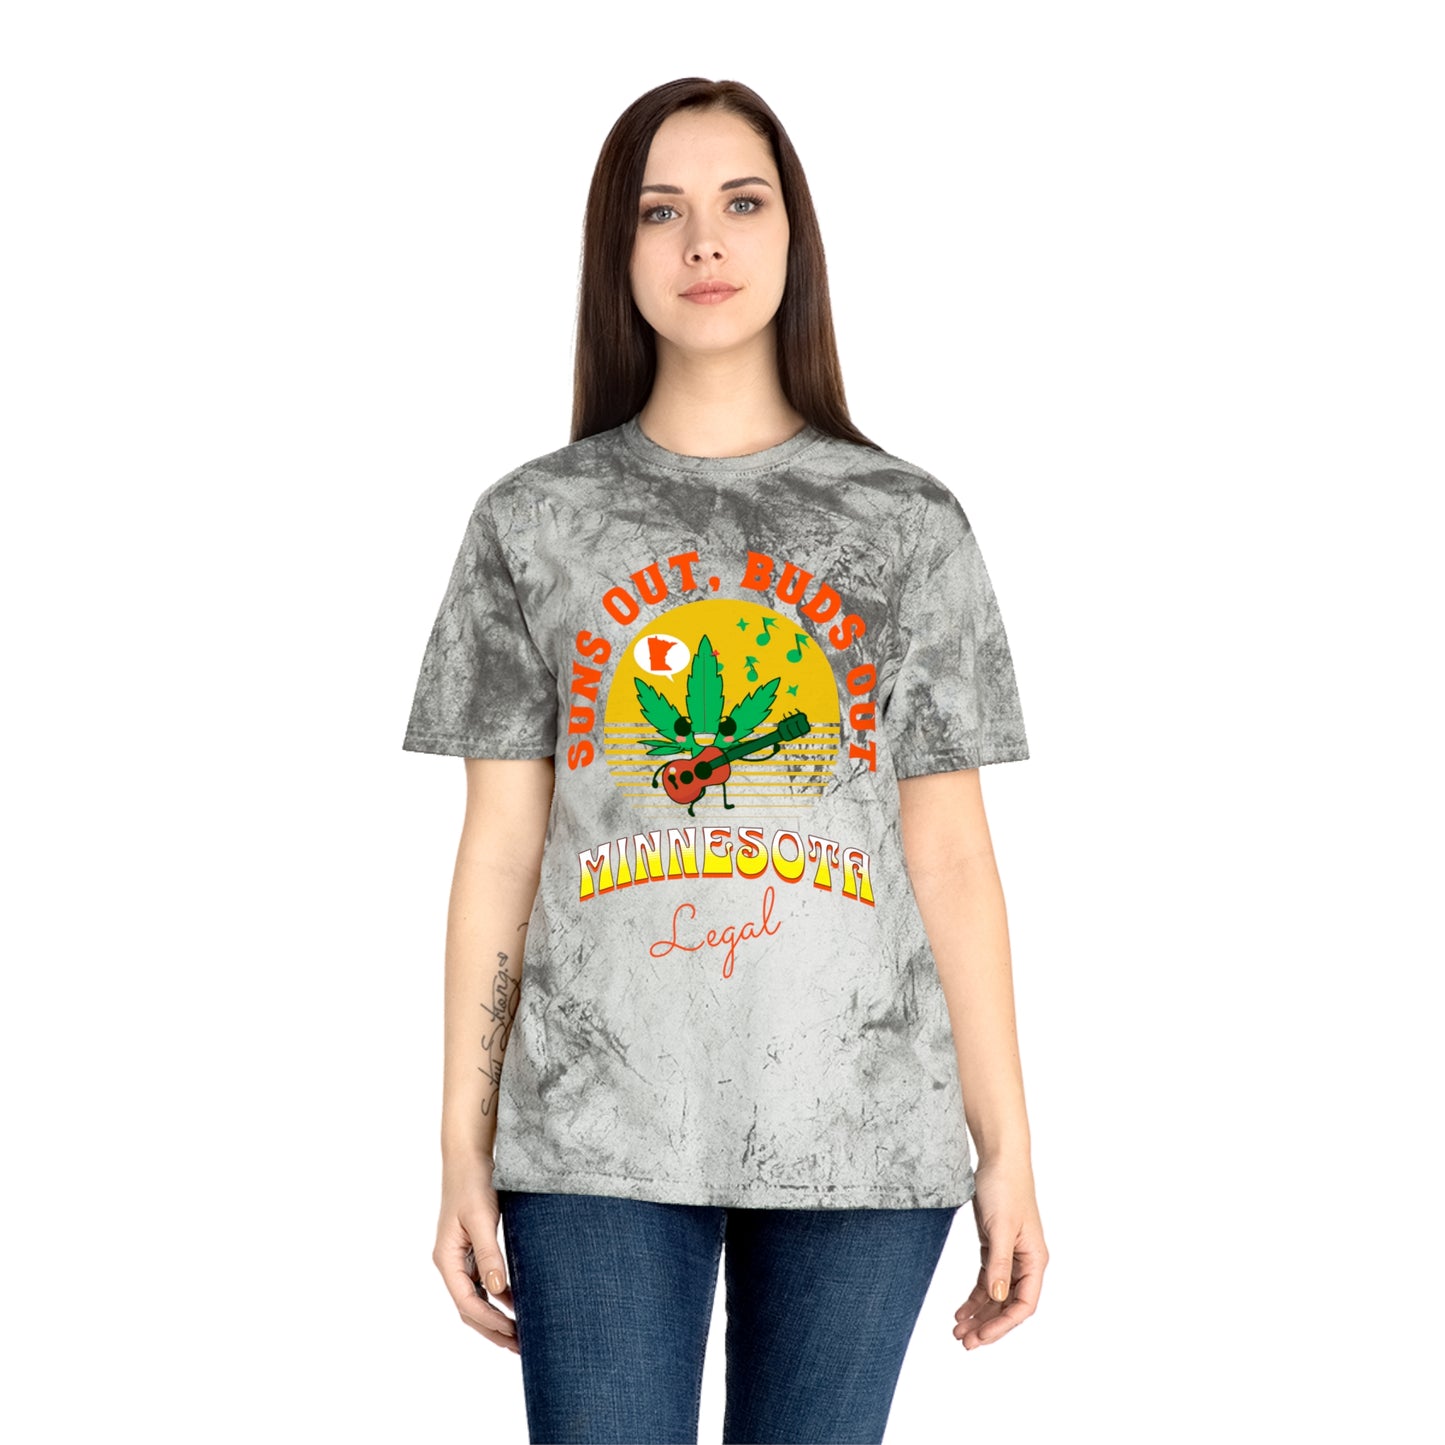 Suns Out, Buds Out | Minnesota Legal Comfort Color T-Shirt